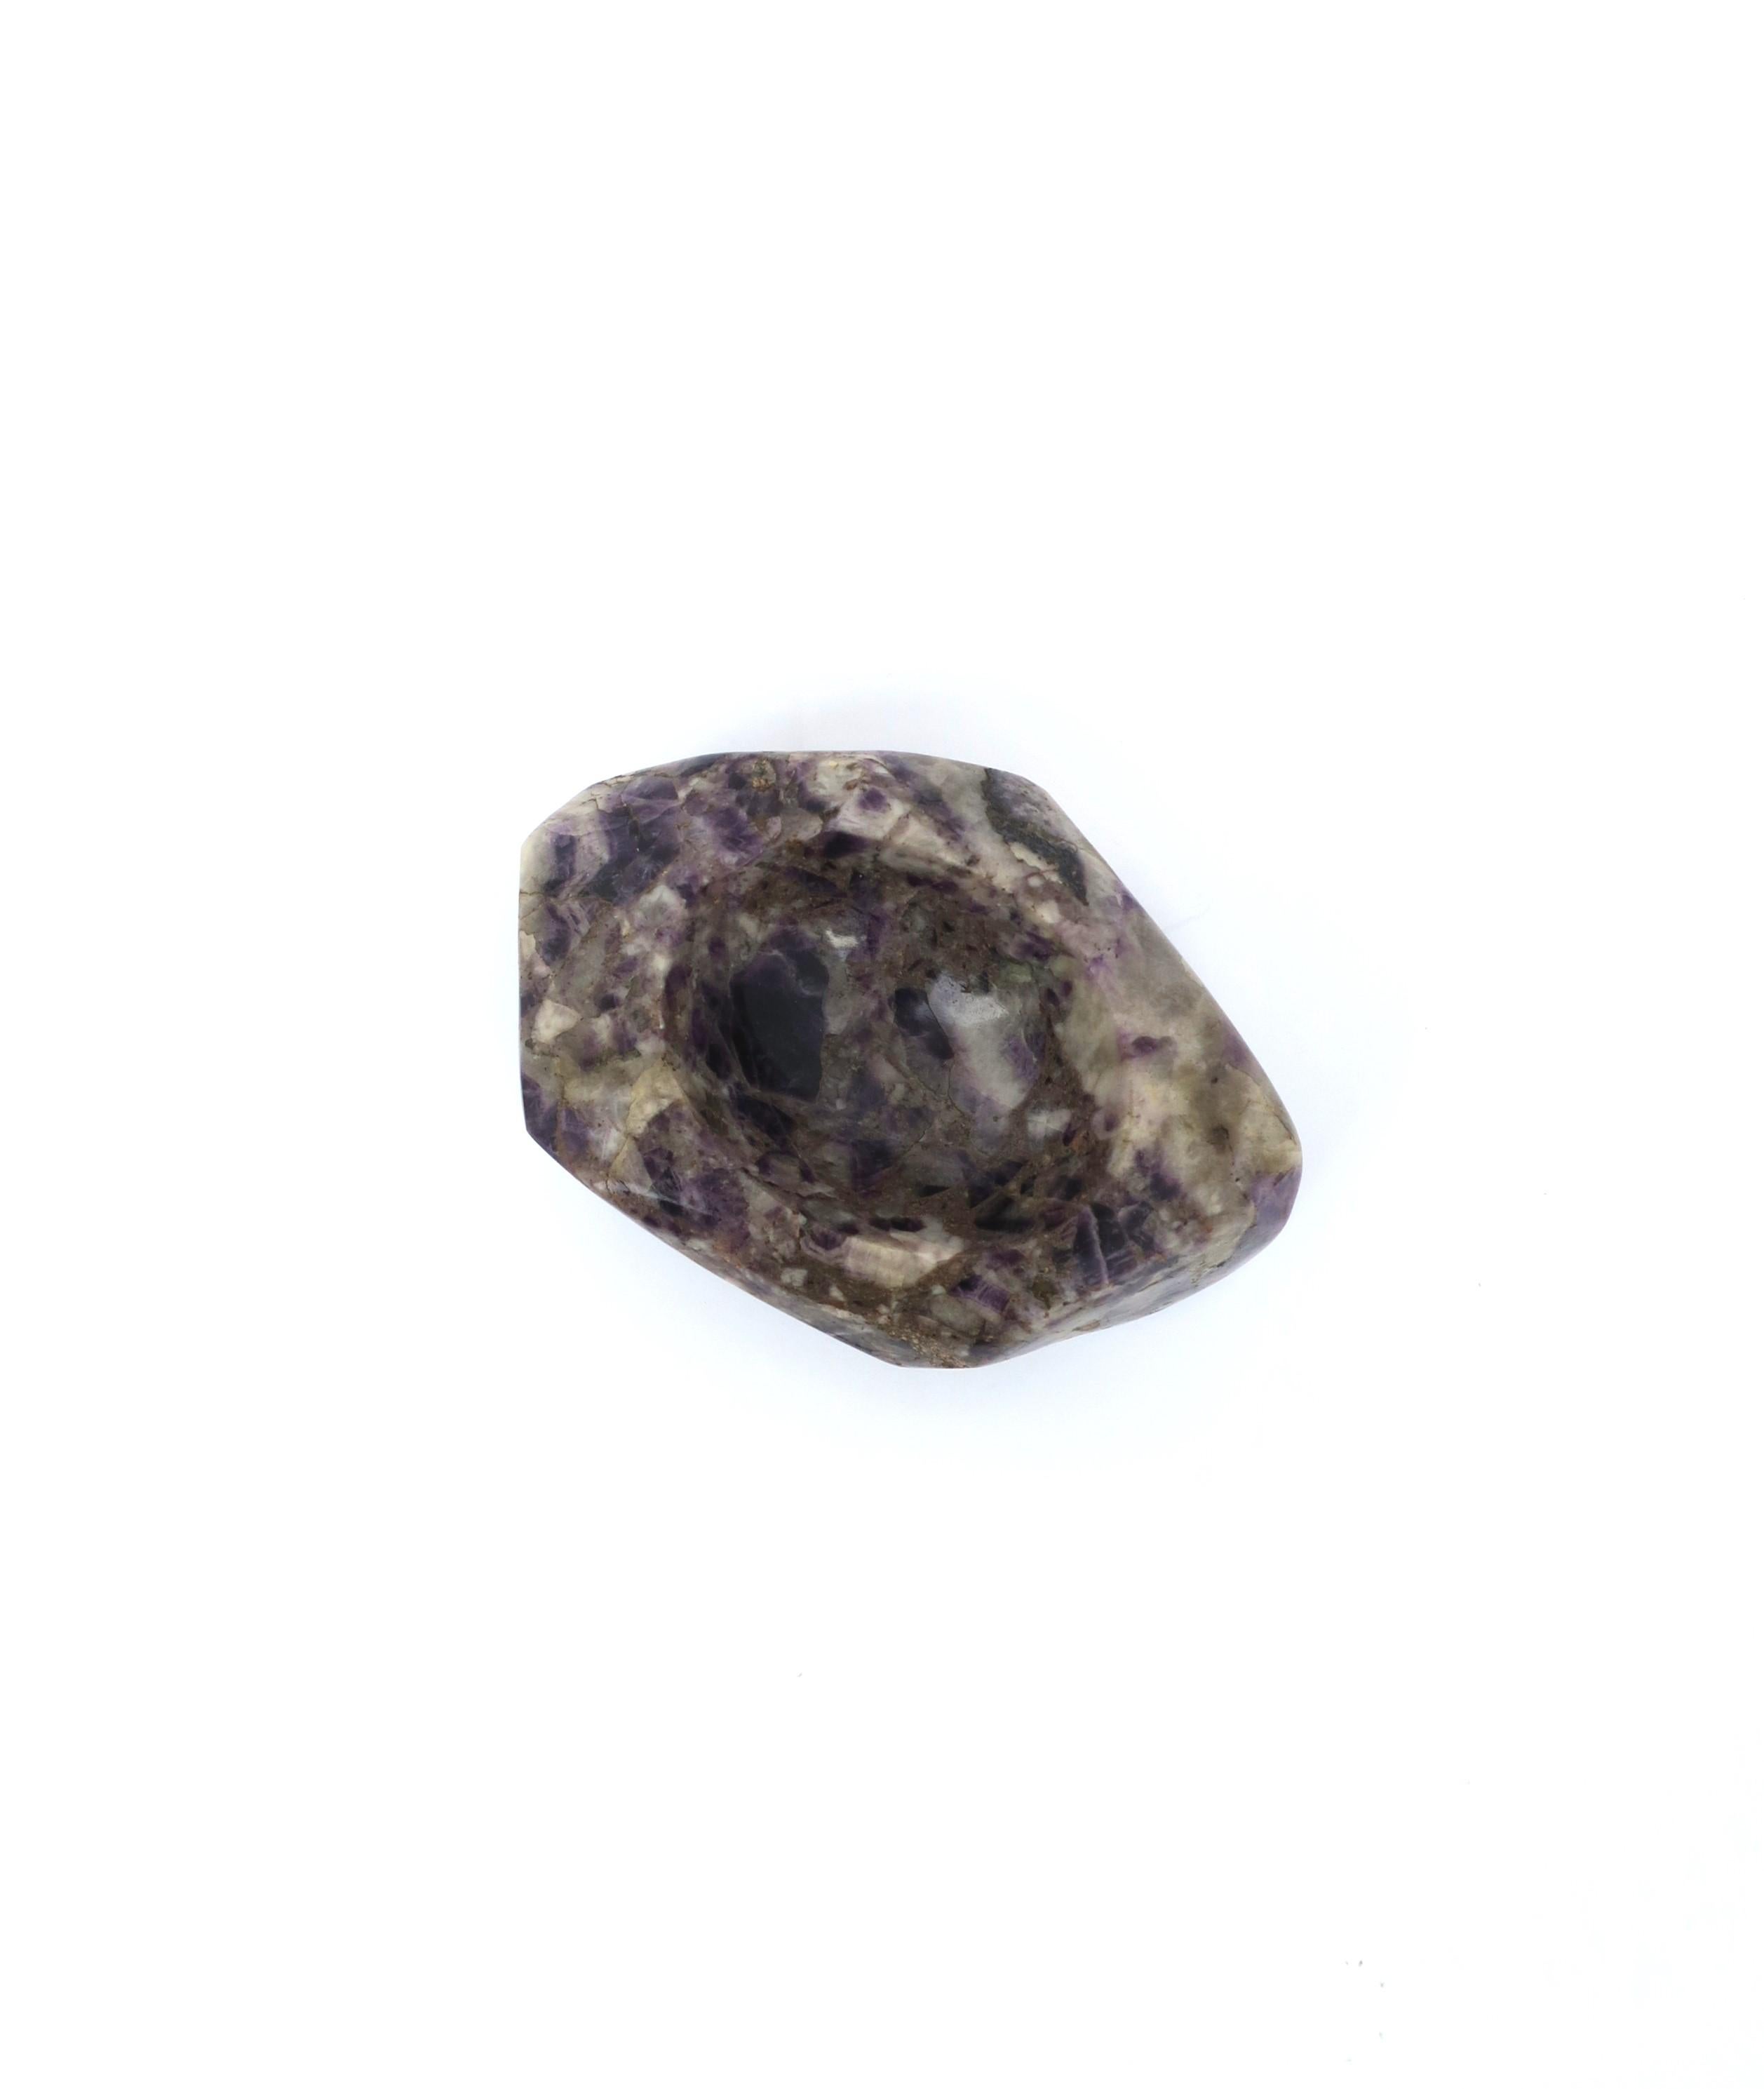 Organic Modern Amythyst Purple and White Stone Jewelry Dish Vide-Poche For Sale